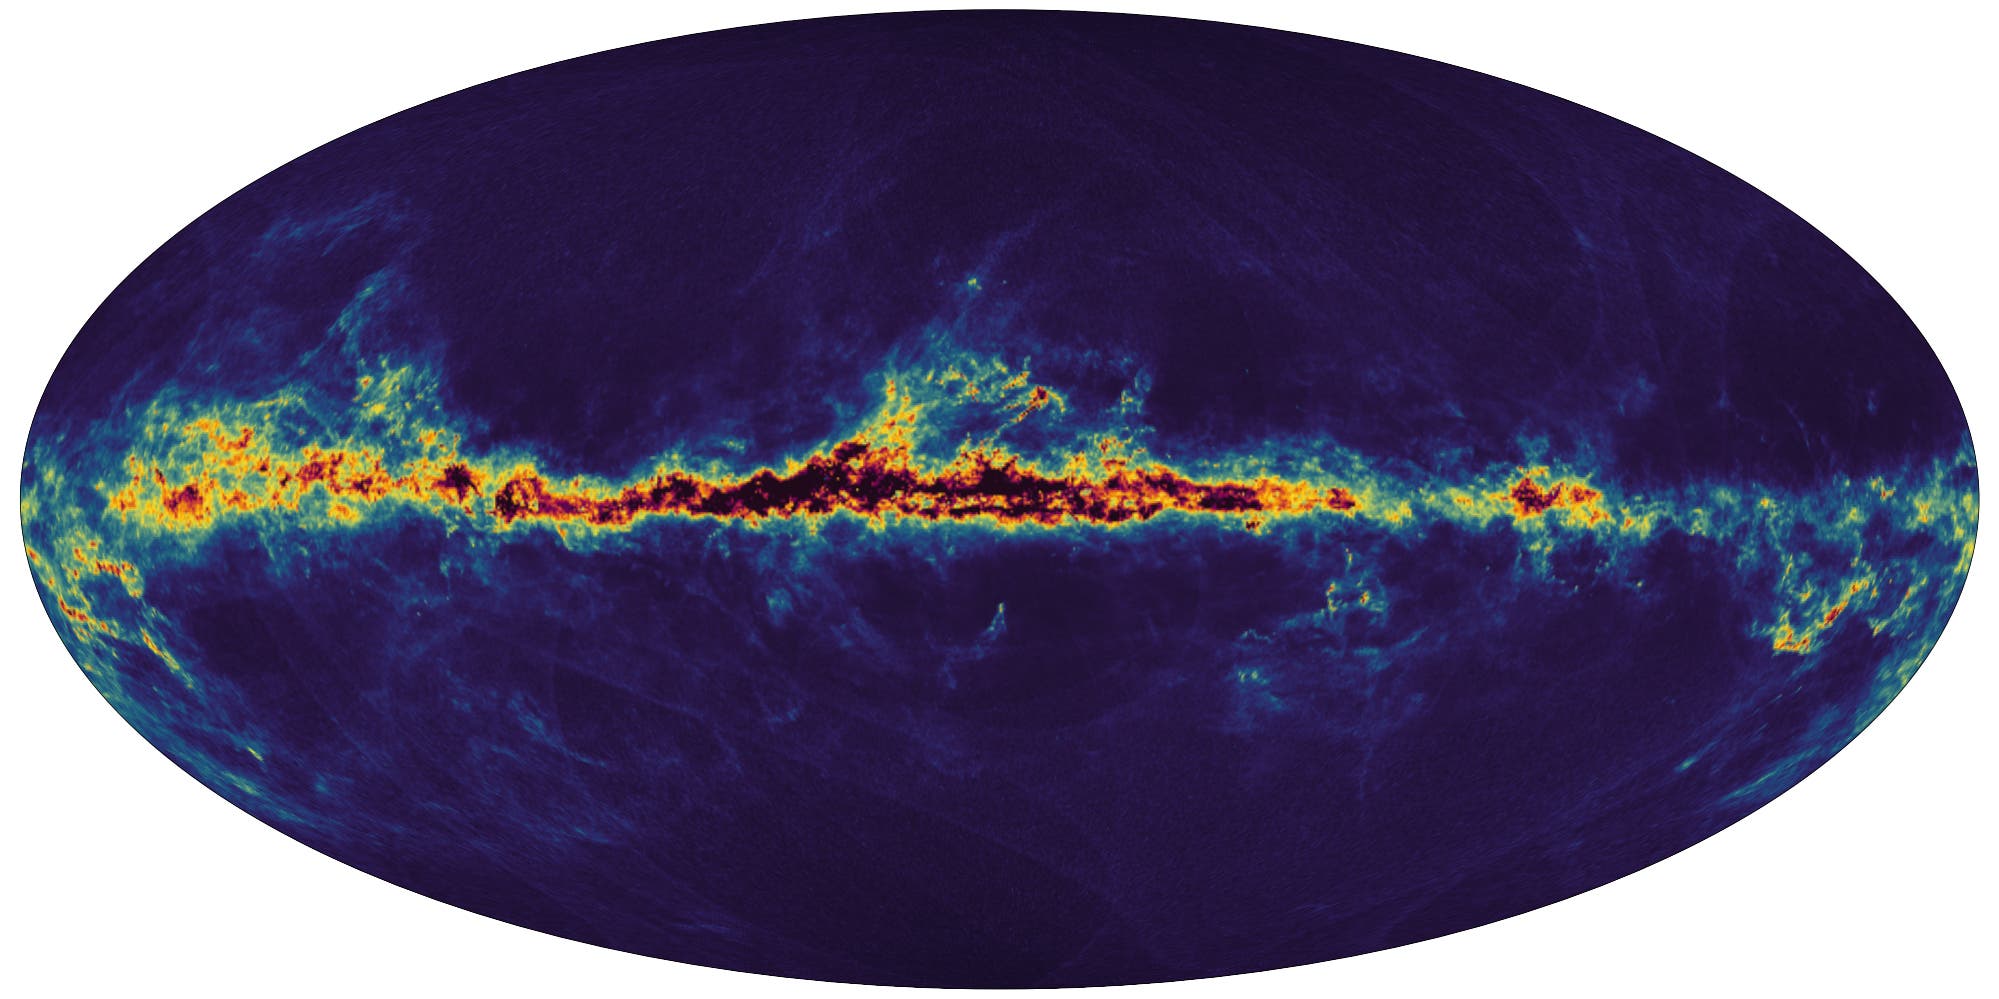 This handout image released by the European Space Agency (ESA) on June 13, 2022, shows a map of the Milky Way made with new data collected by the ESA space probe Gaia, showing the interstellar dust that fills the galaxy. The Gaia space probe unveiled its latest discoveries on June 13, 2022, in its quest to map the Milky Way in unprecedented detail, surveying nearly two million stars and revealing mysterious starquakes which sweep across the fiery giants like vast tsunamis.